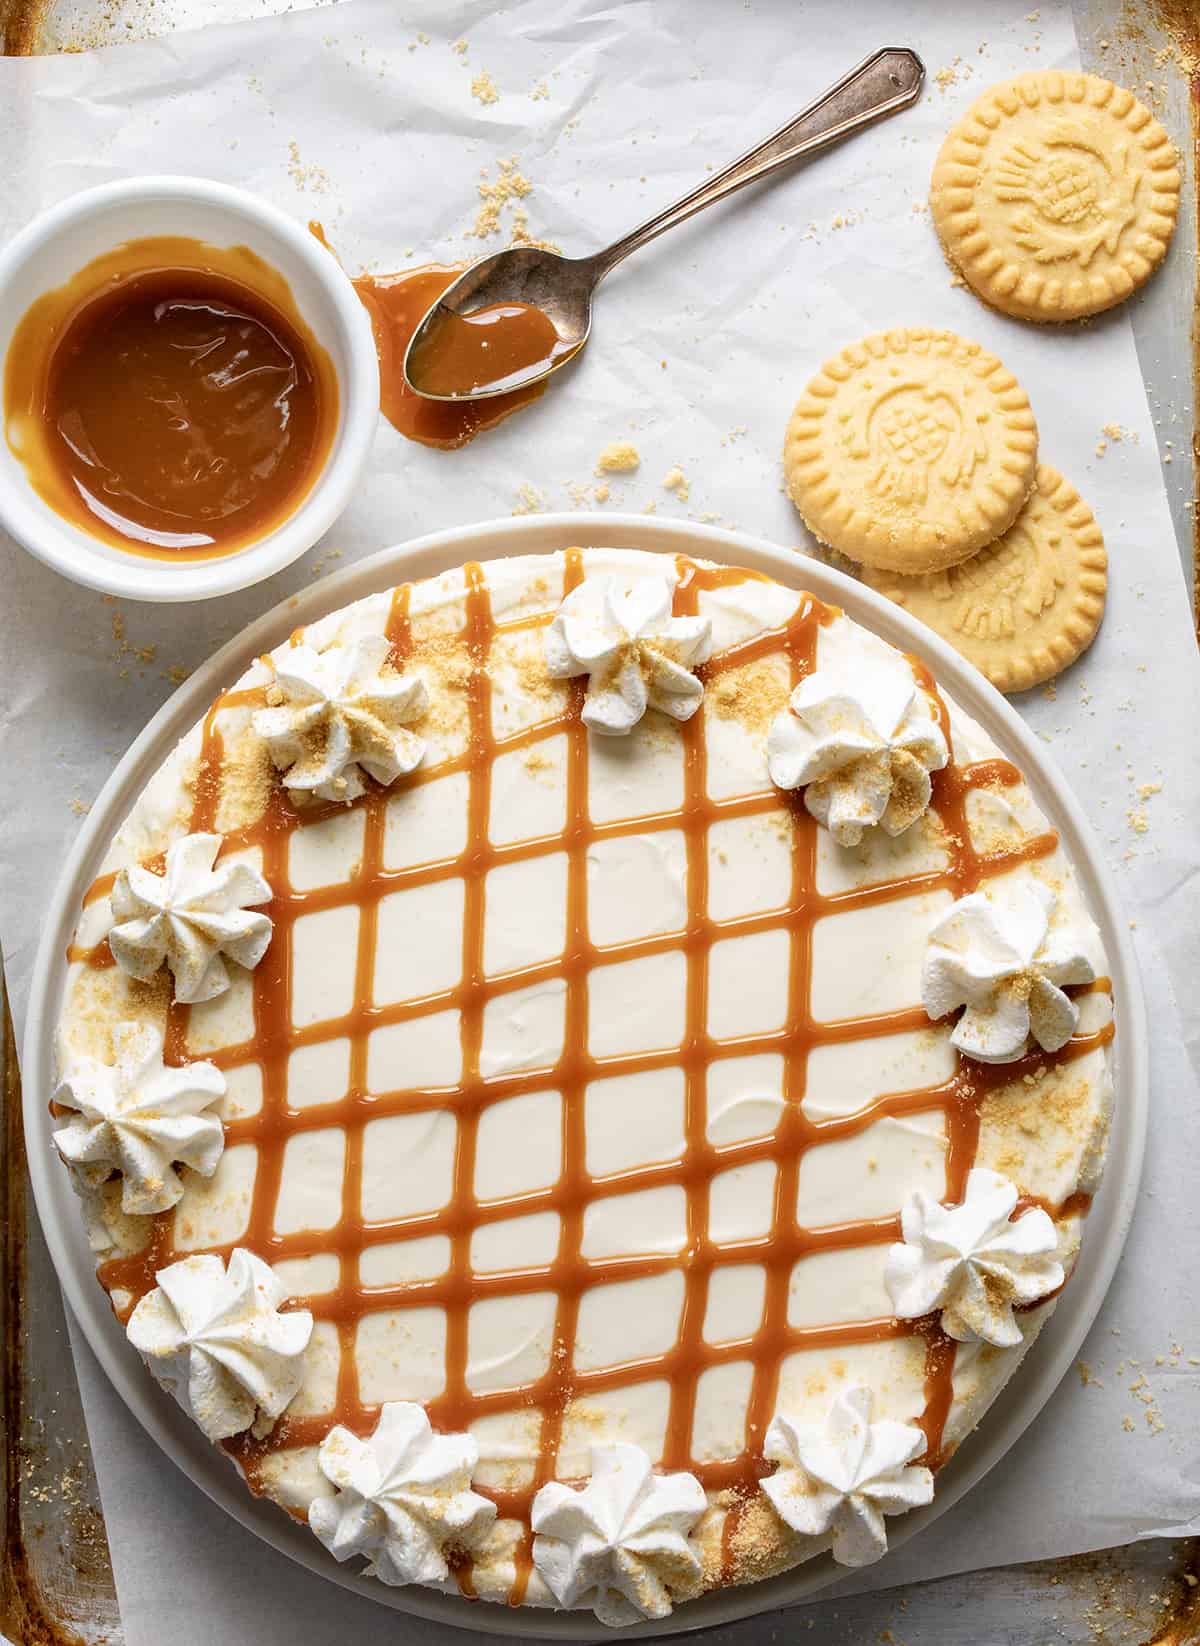 Caramel Cheesecake from Overhead with some Shortbread Cookies and Caramel Nearby.